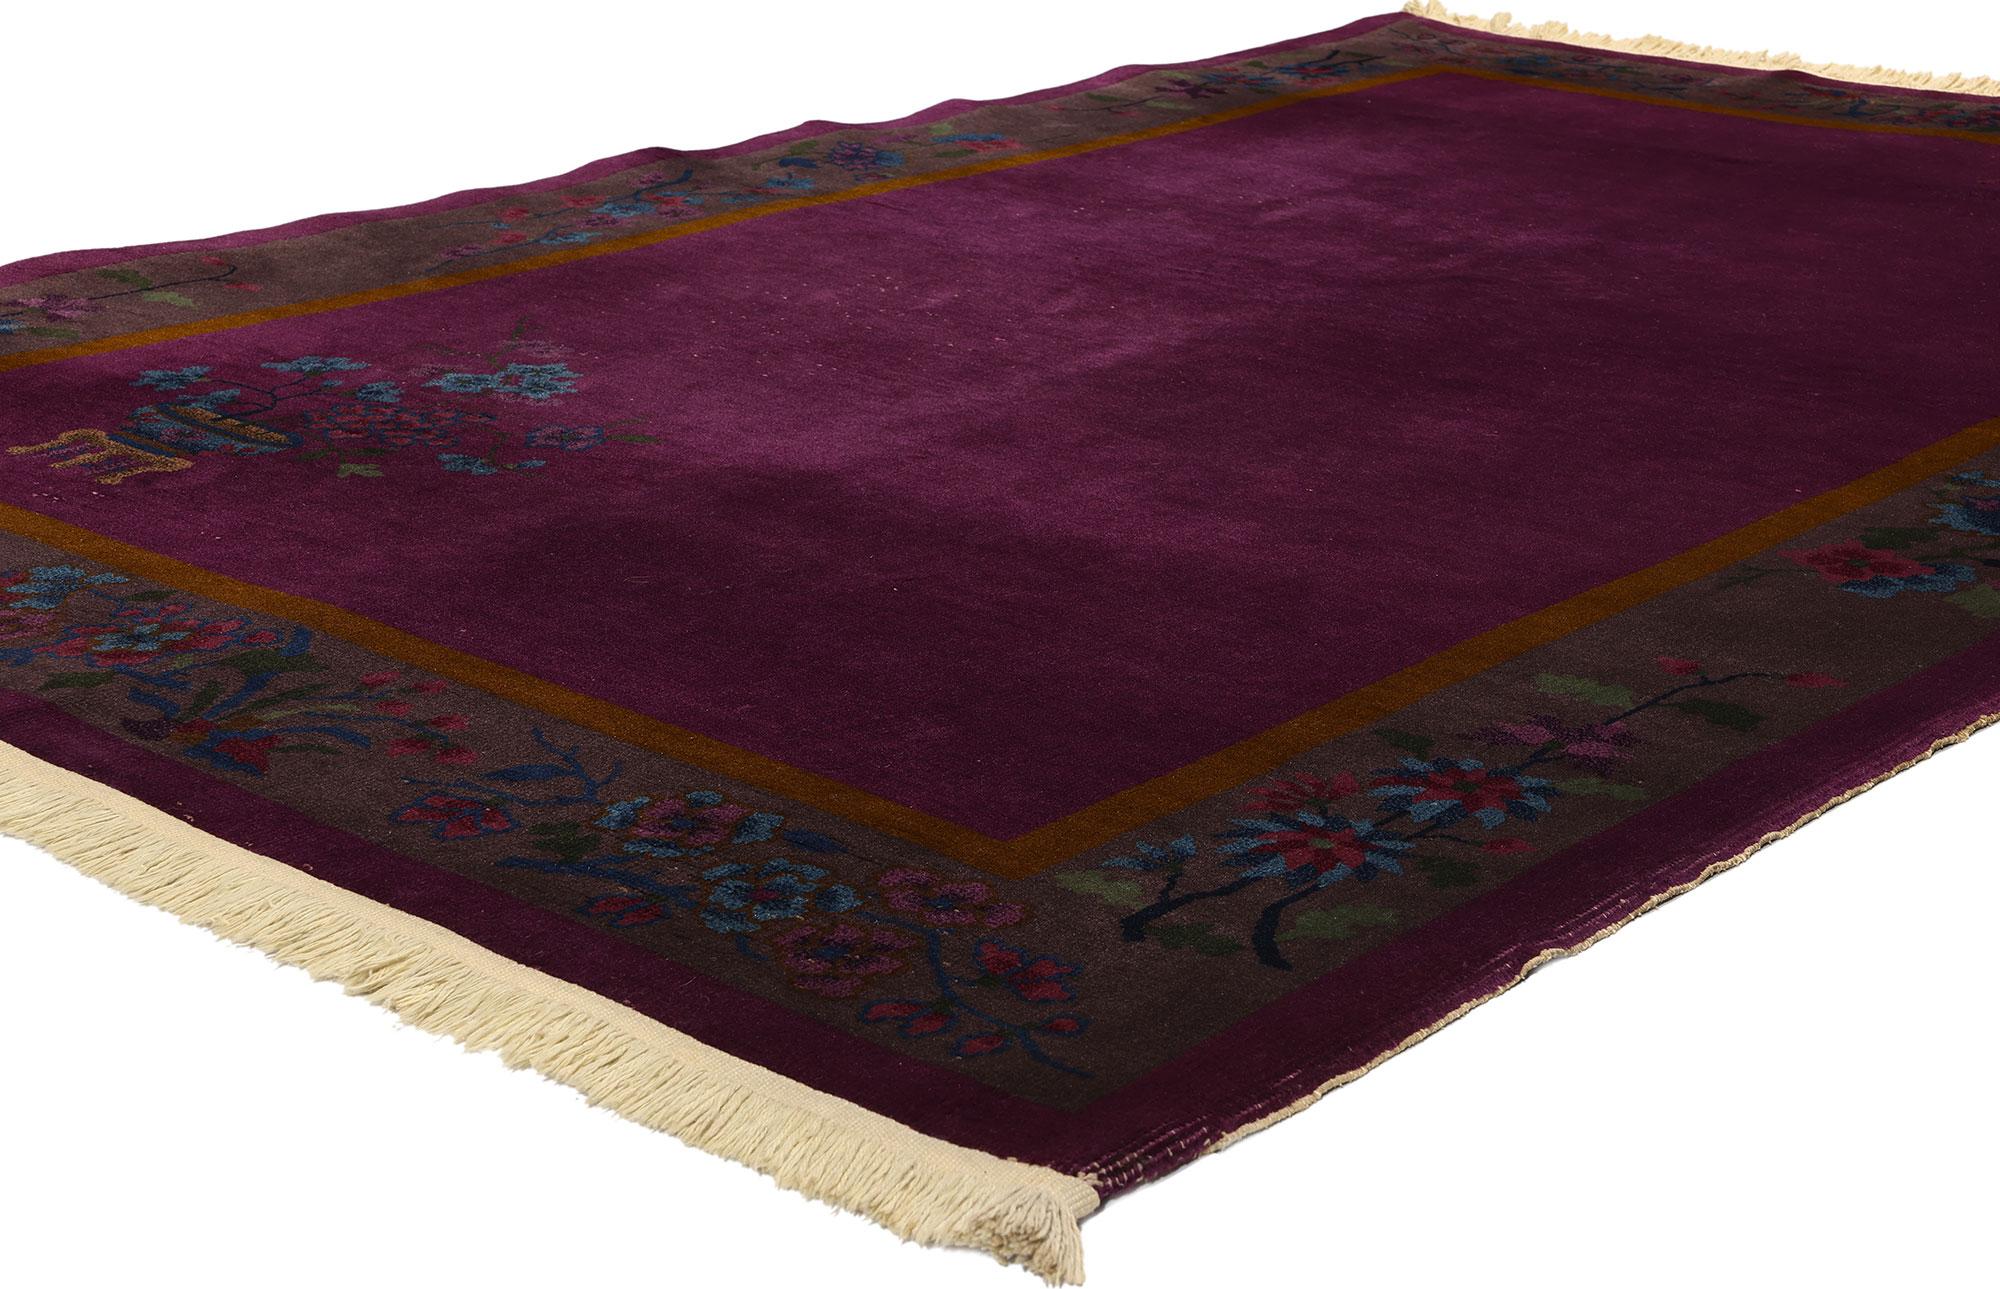 78725 Antique Purple Chinese Art Deco Rug, 04'11 x 07'09. Chinese Art Deco rugs, originating in the early 20th century, marry traditional Chinese motifs with the geometric shapes and vibrant color palettes characteristic of the Art Deco movement.